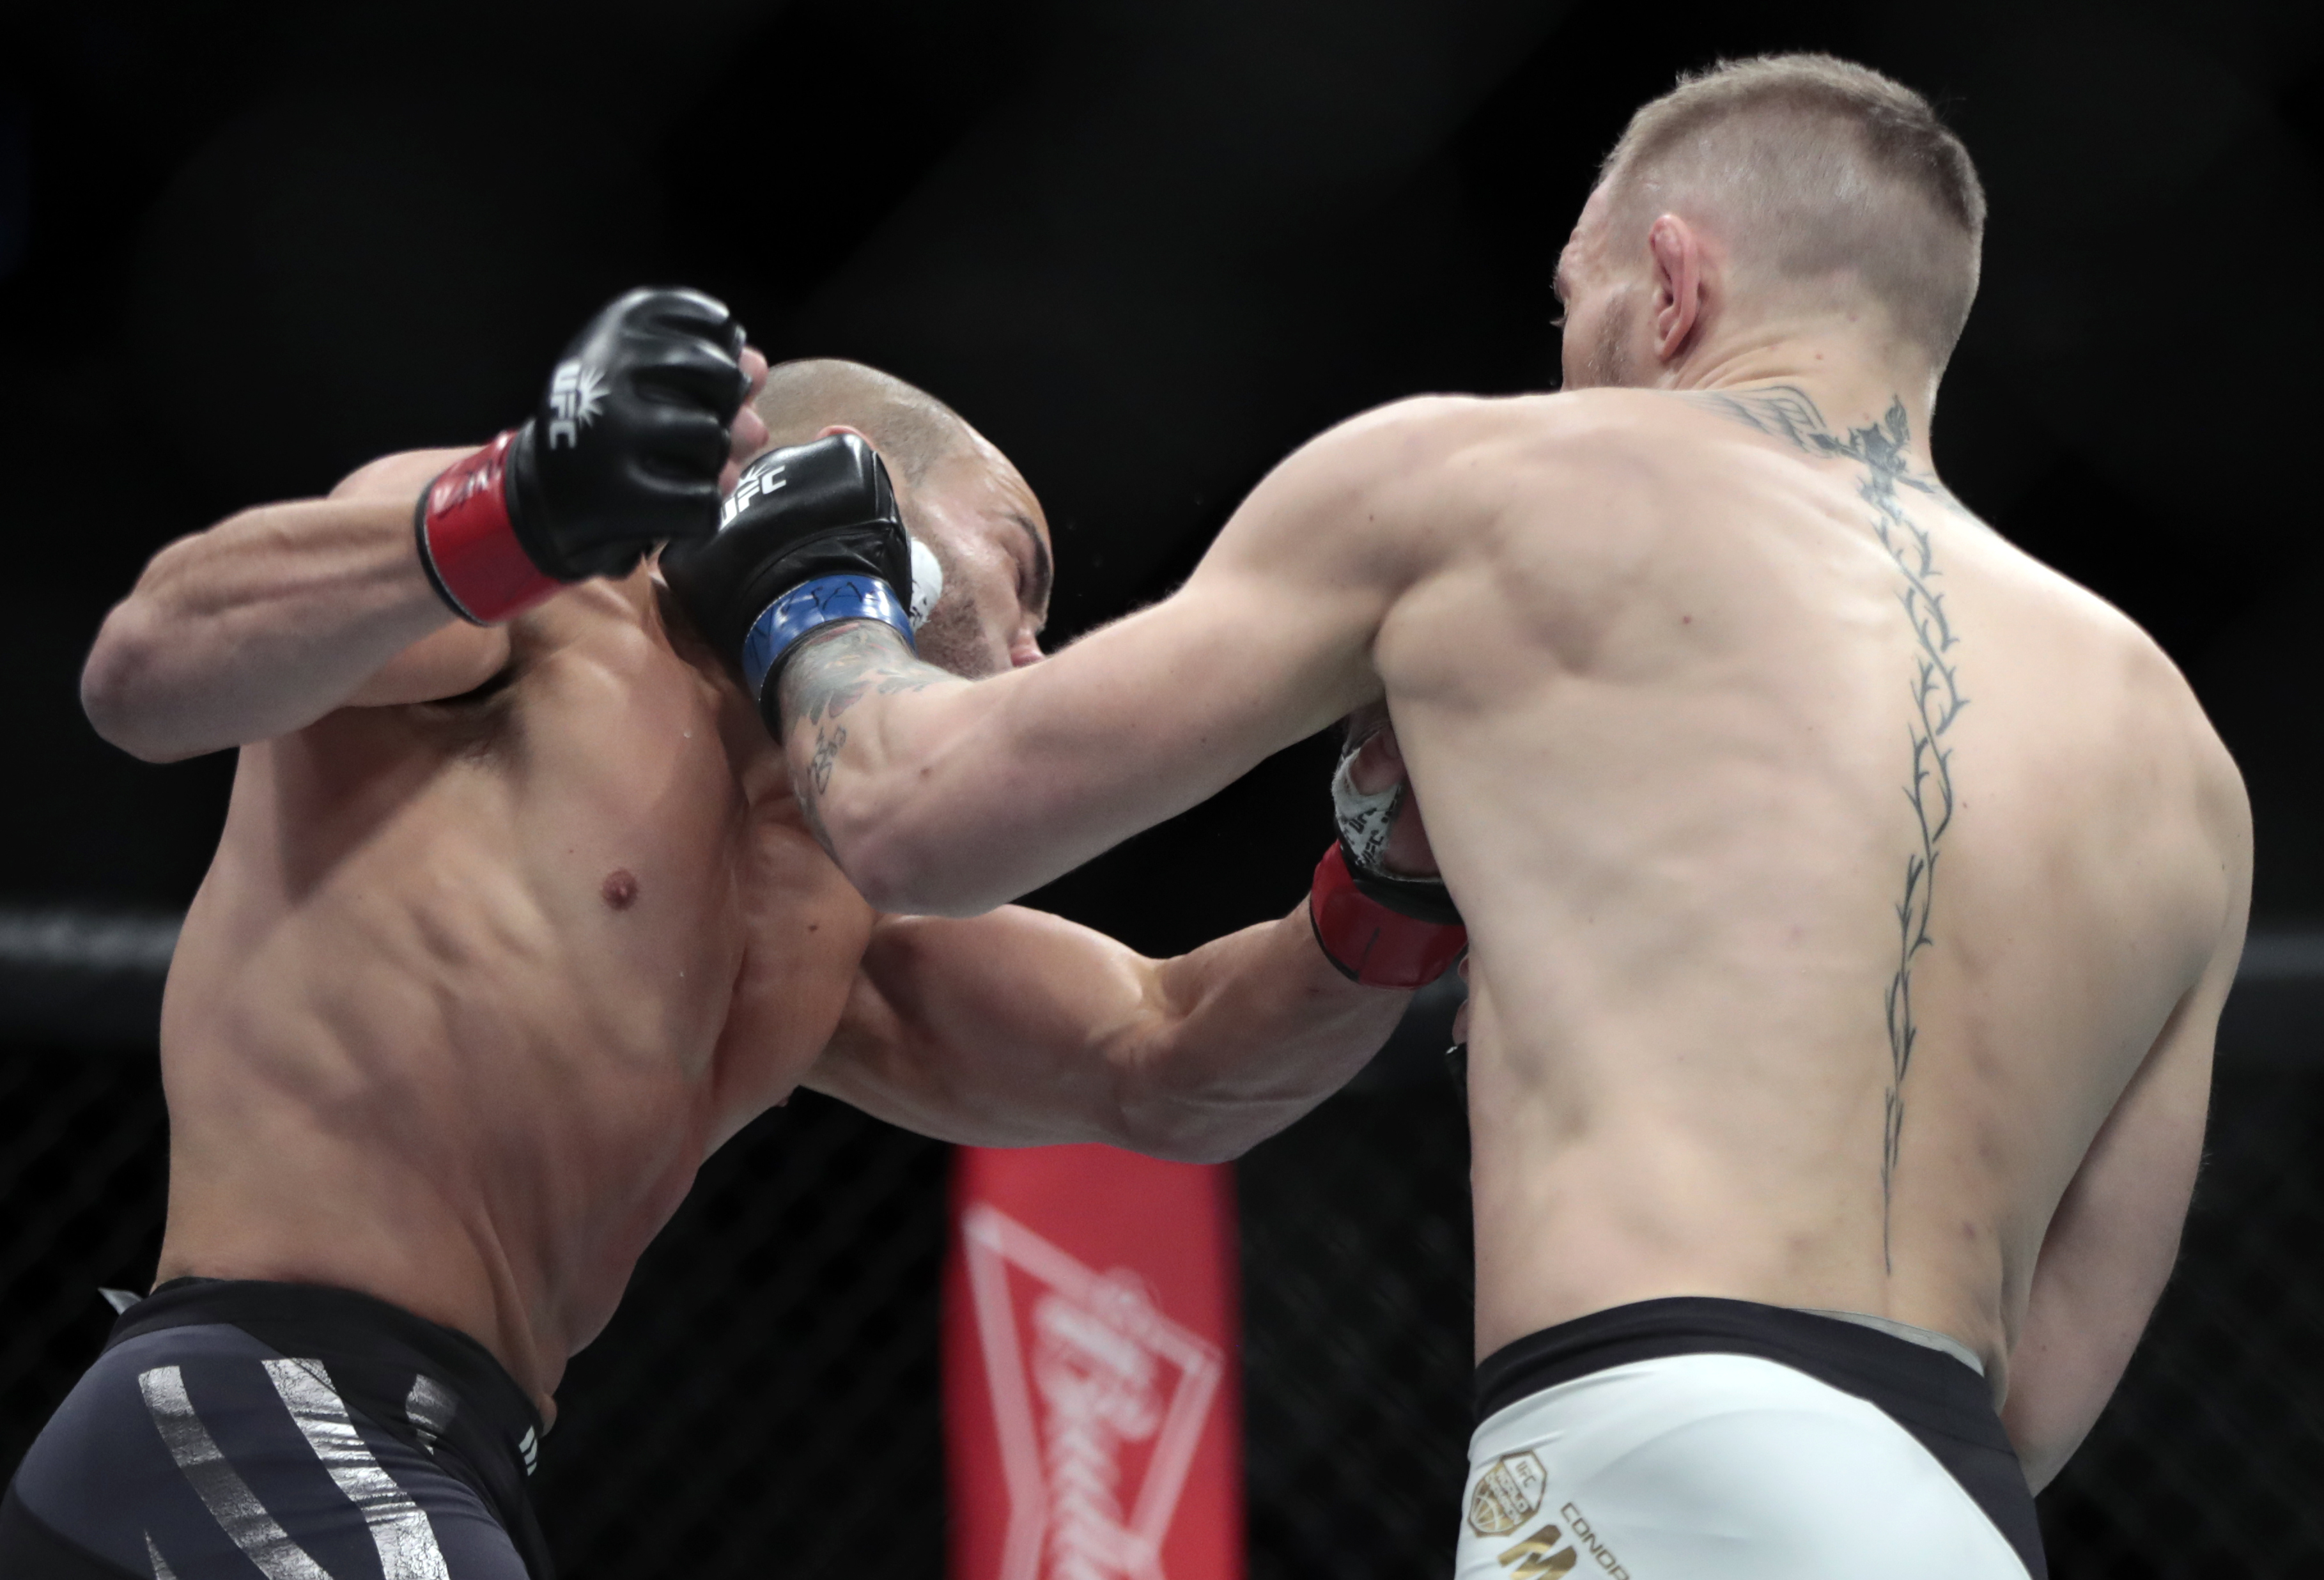 Conor McGregor, right, fights Eddie Alvarez during a lightweight title mixed martial arts bout at UFC 205, early Sunday, Nov. 13, 2016, at Madison Square Garden in New York. (AP Photo/Julio Cortez)